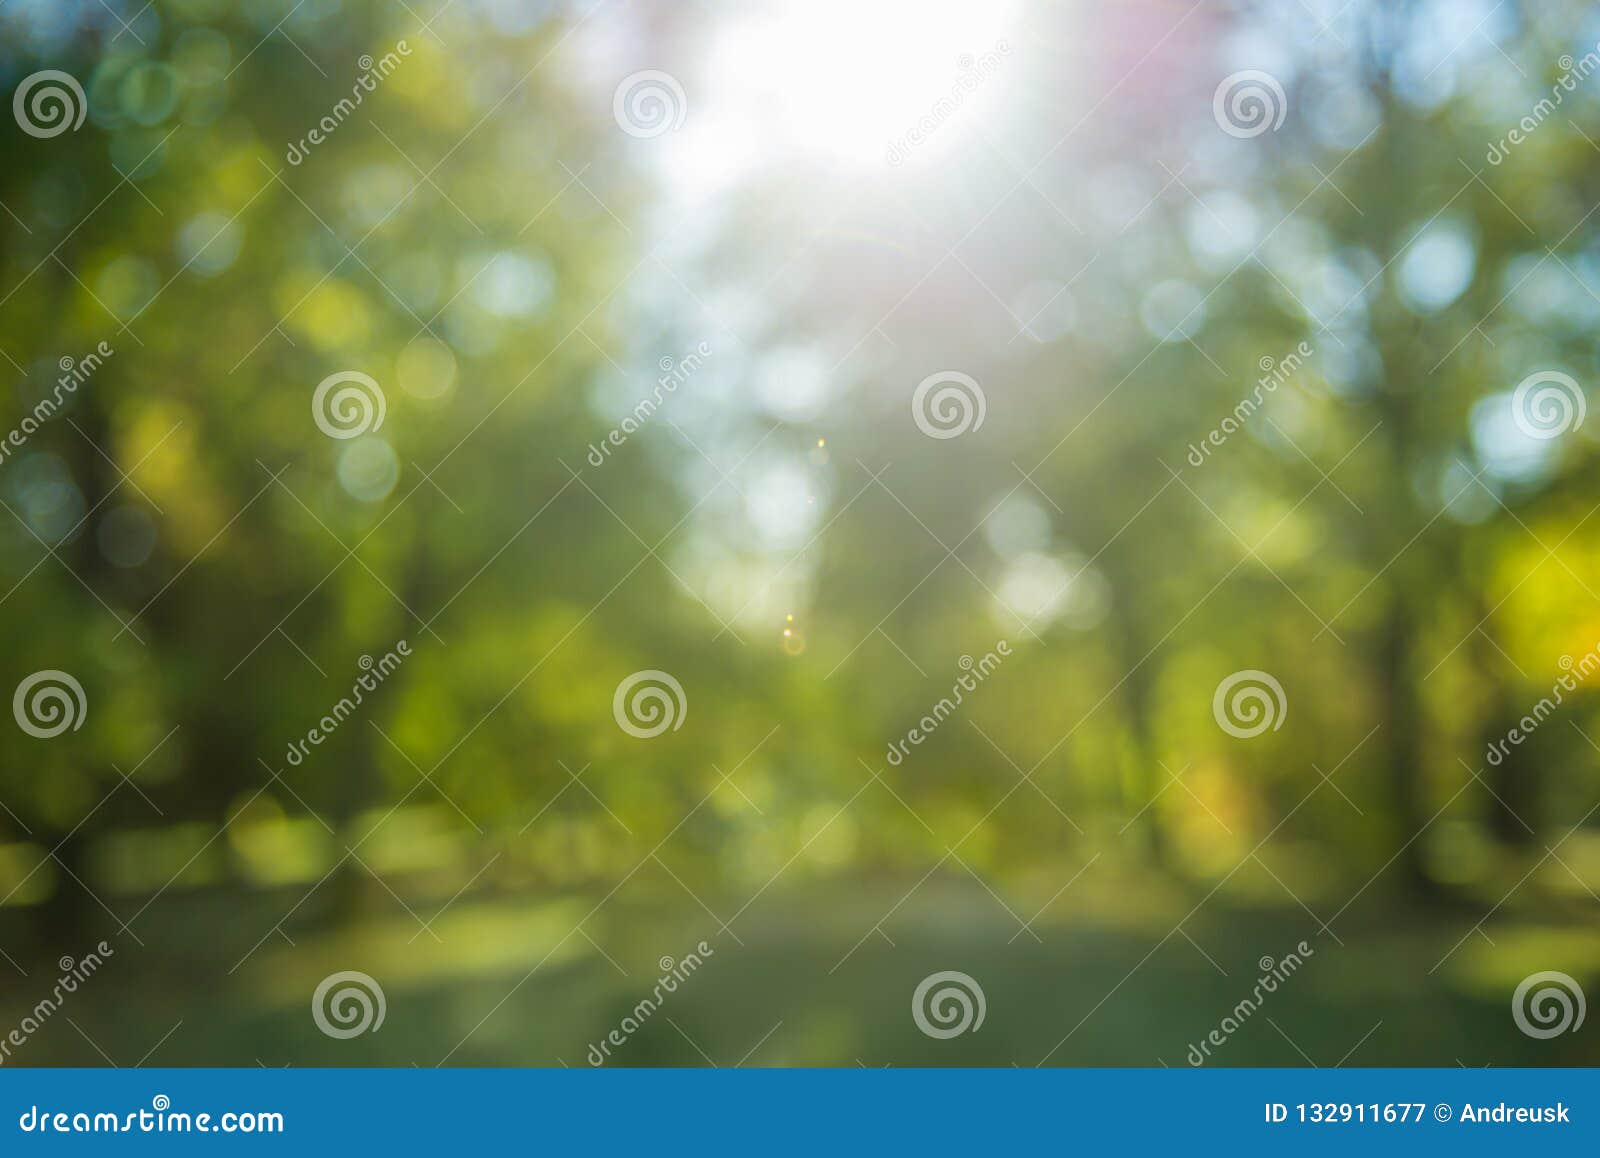 blurred trees background with sunbeams